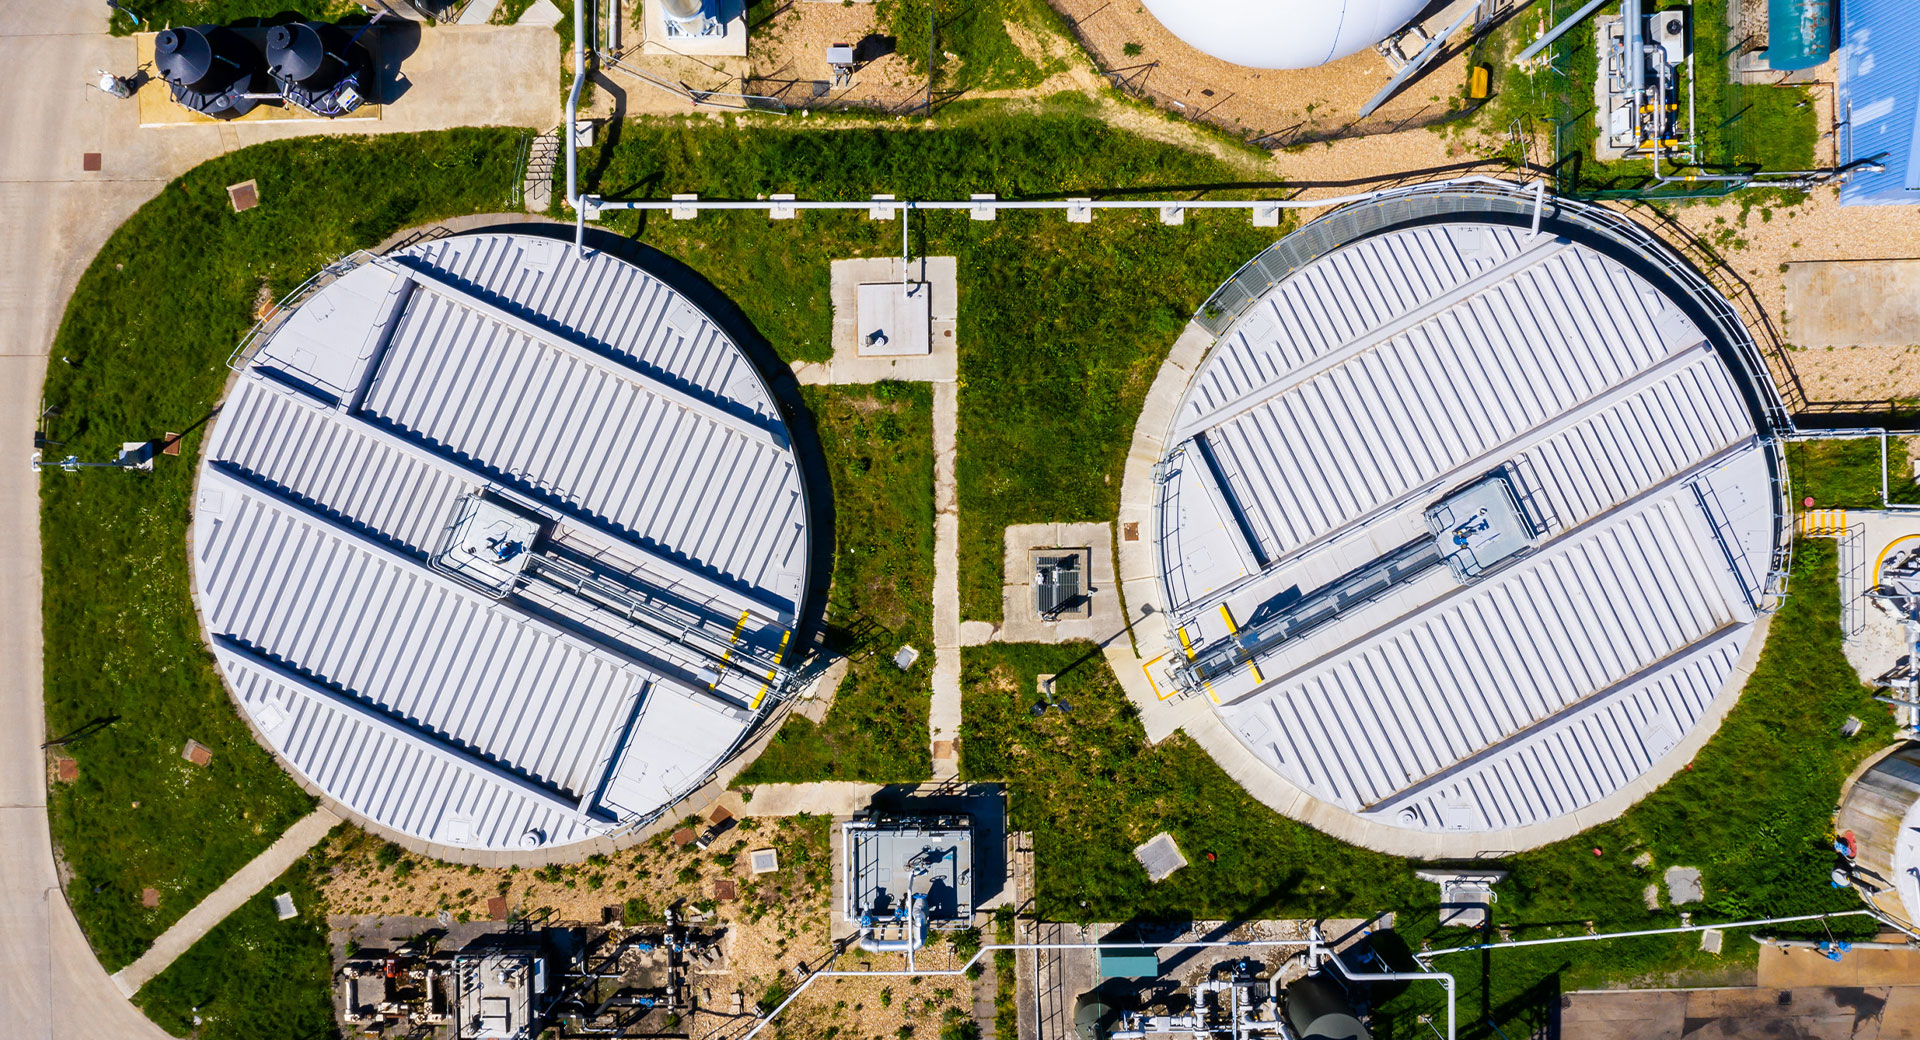 An aerial view of tanks at a wastewater treatment works